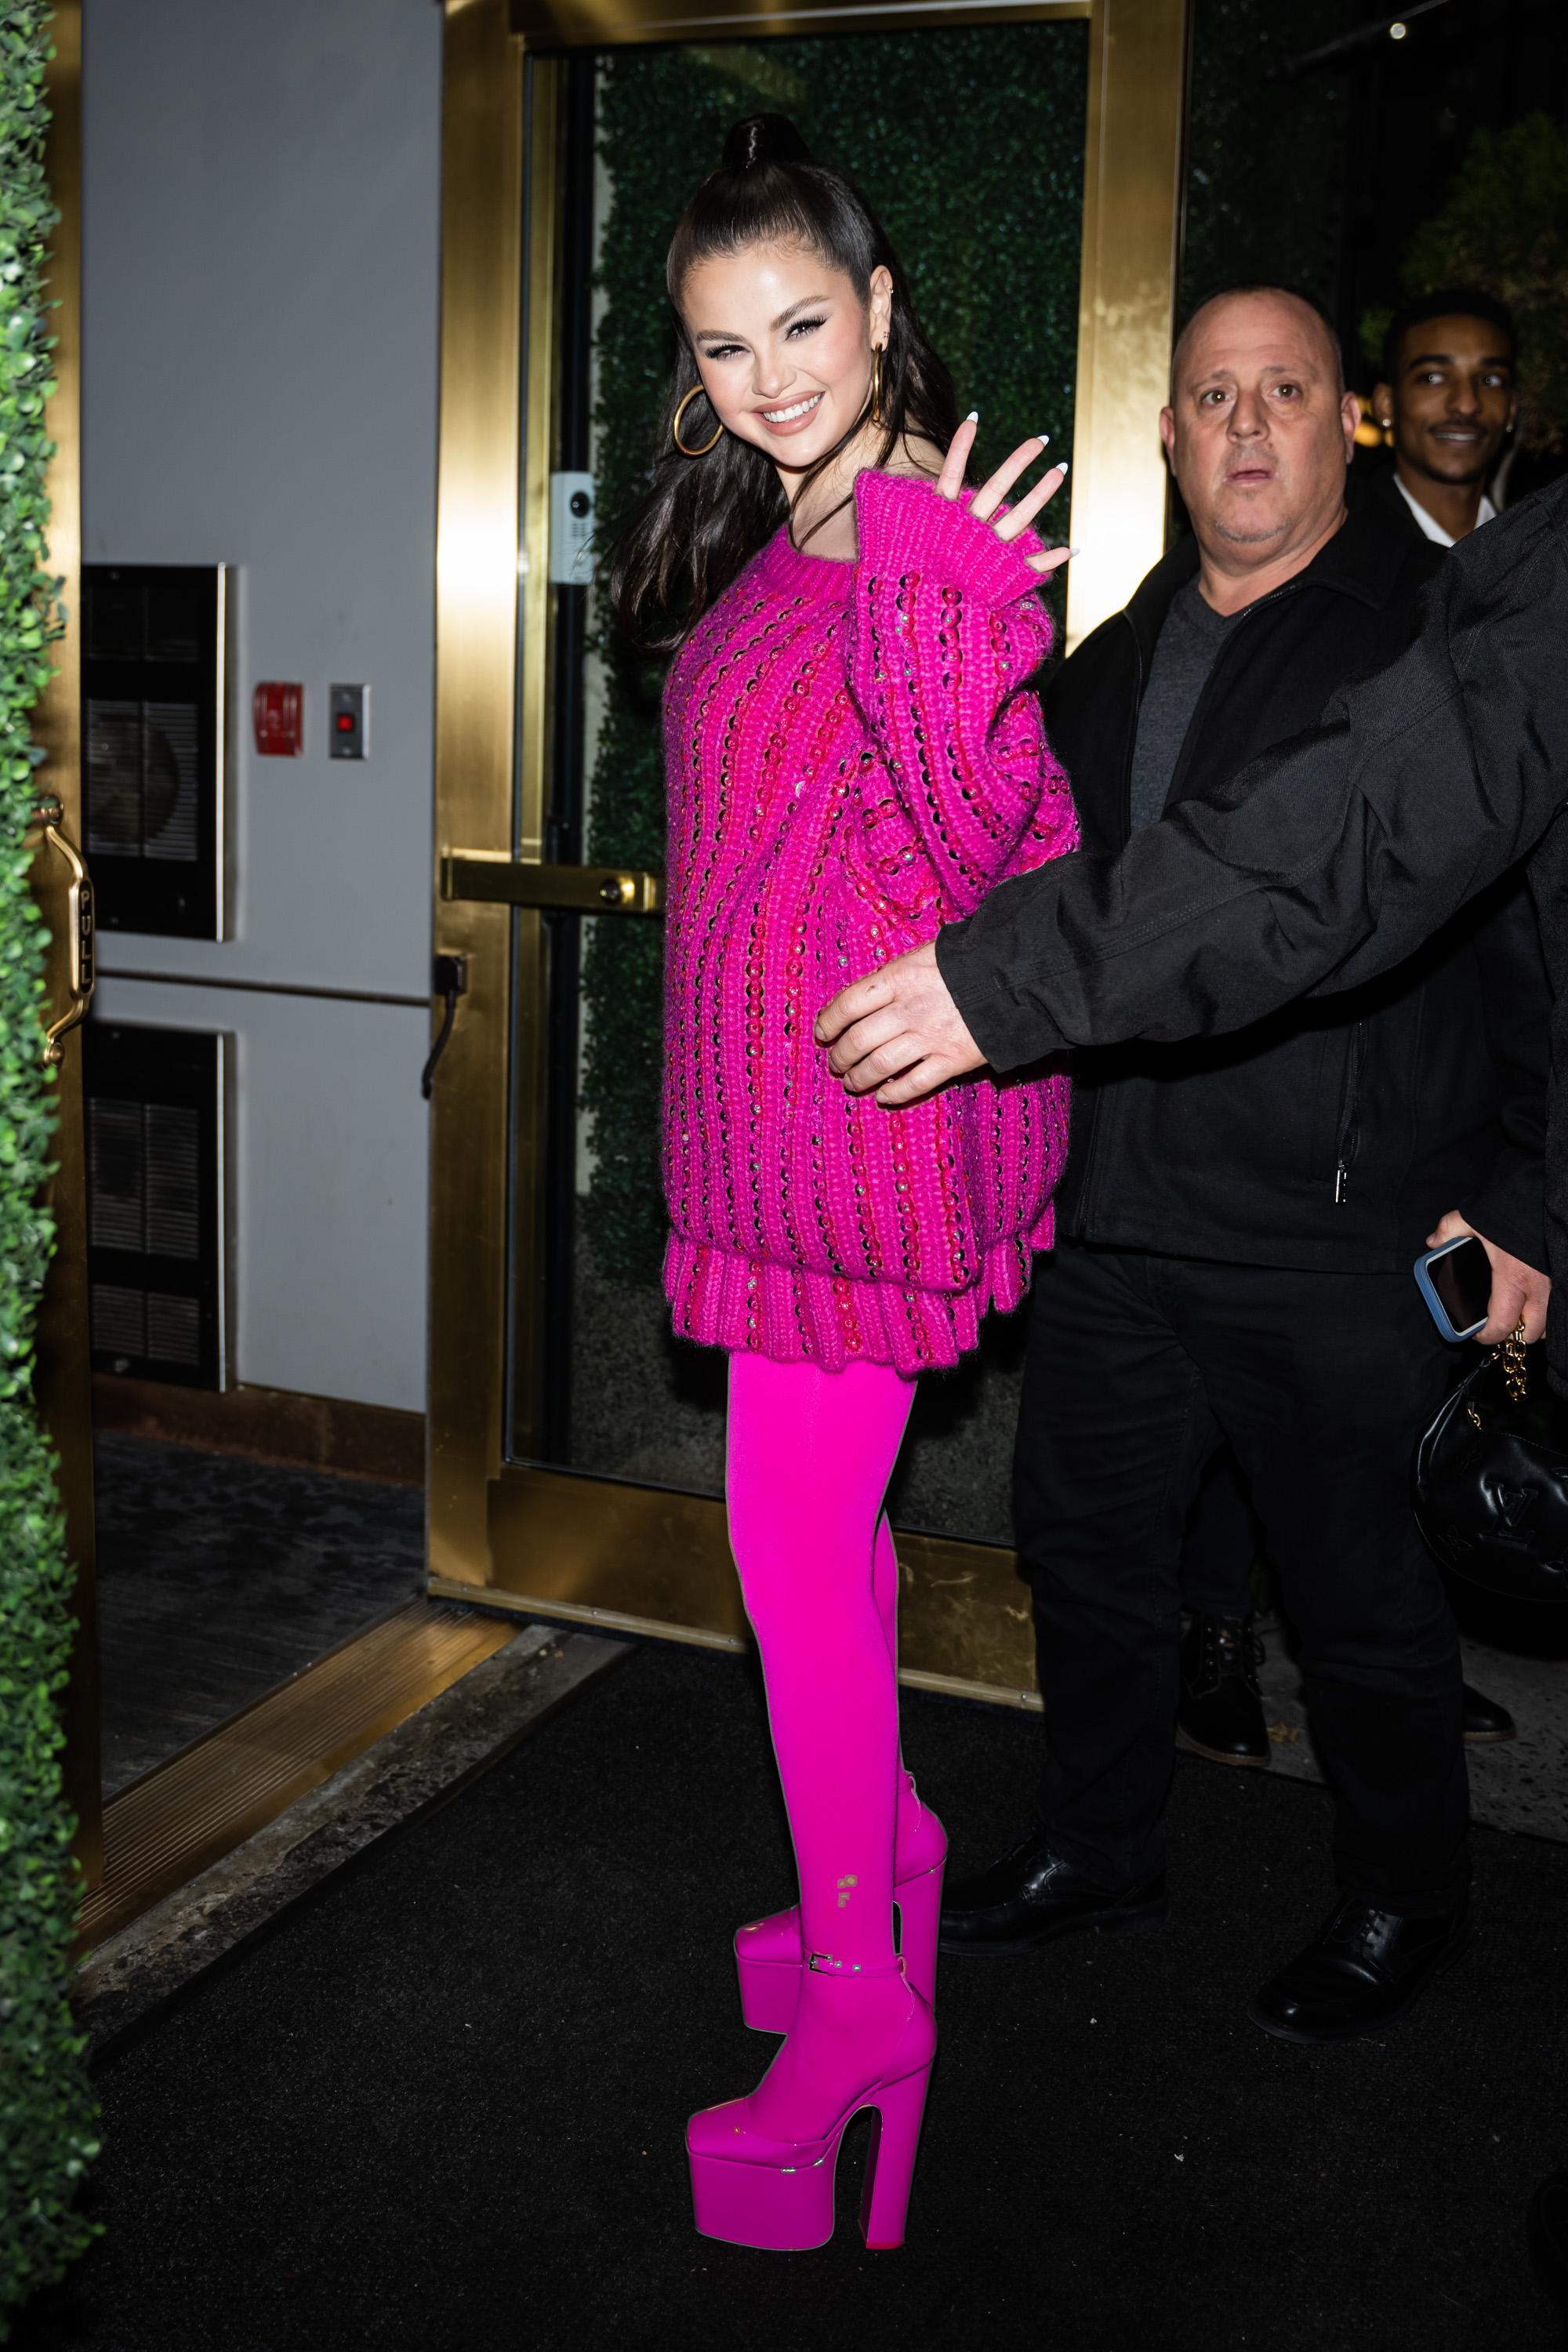 Selena Gomez is seen in Midtown on December 11, 2022 in New York City. Gomez in all electric pink outfit after making an 'Saturday Night Live' cameo appearance.